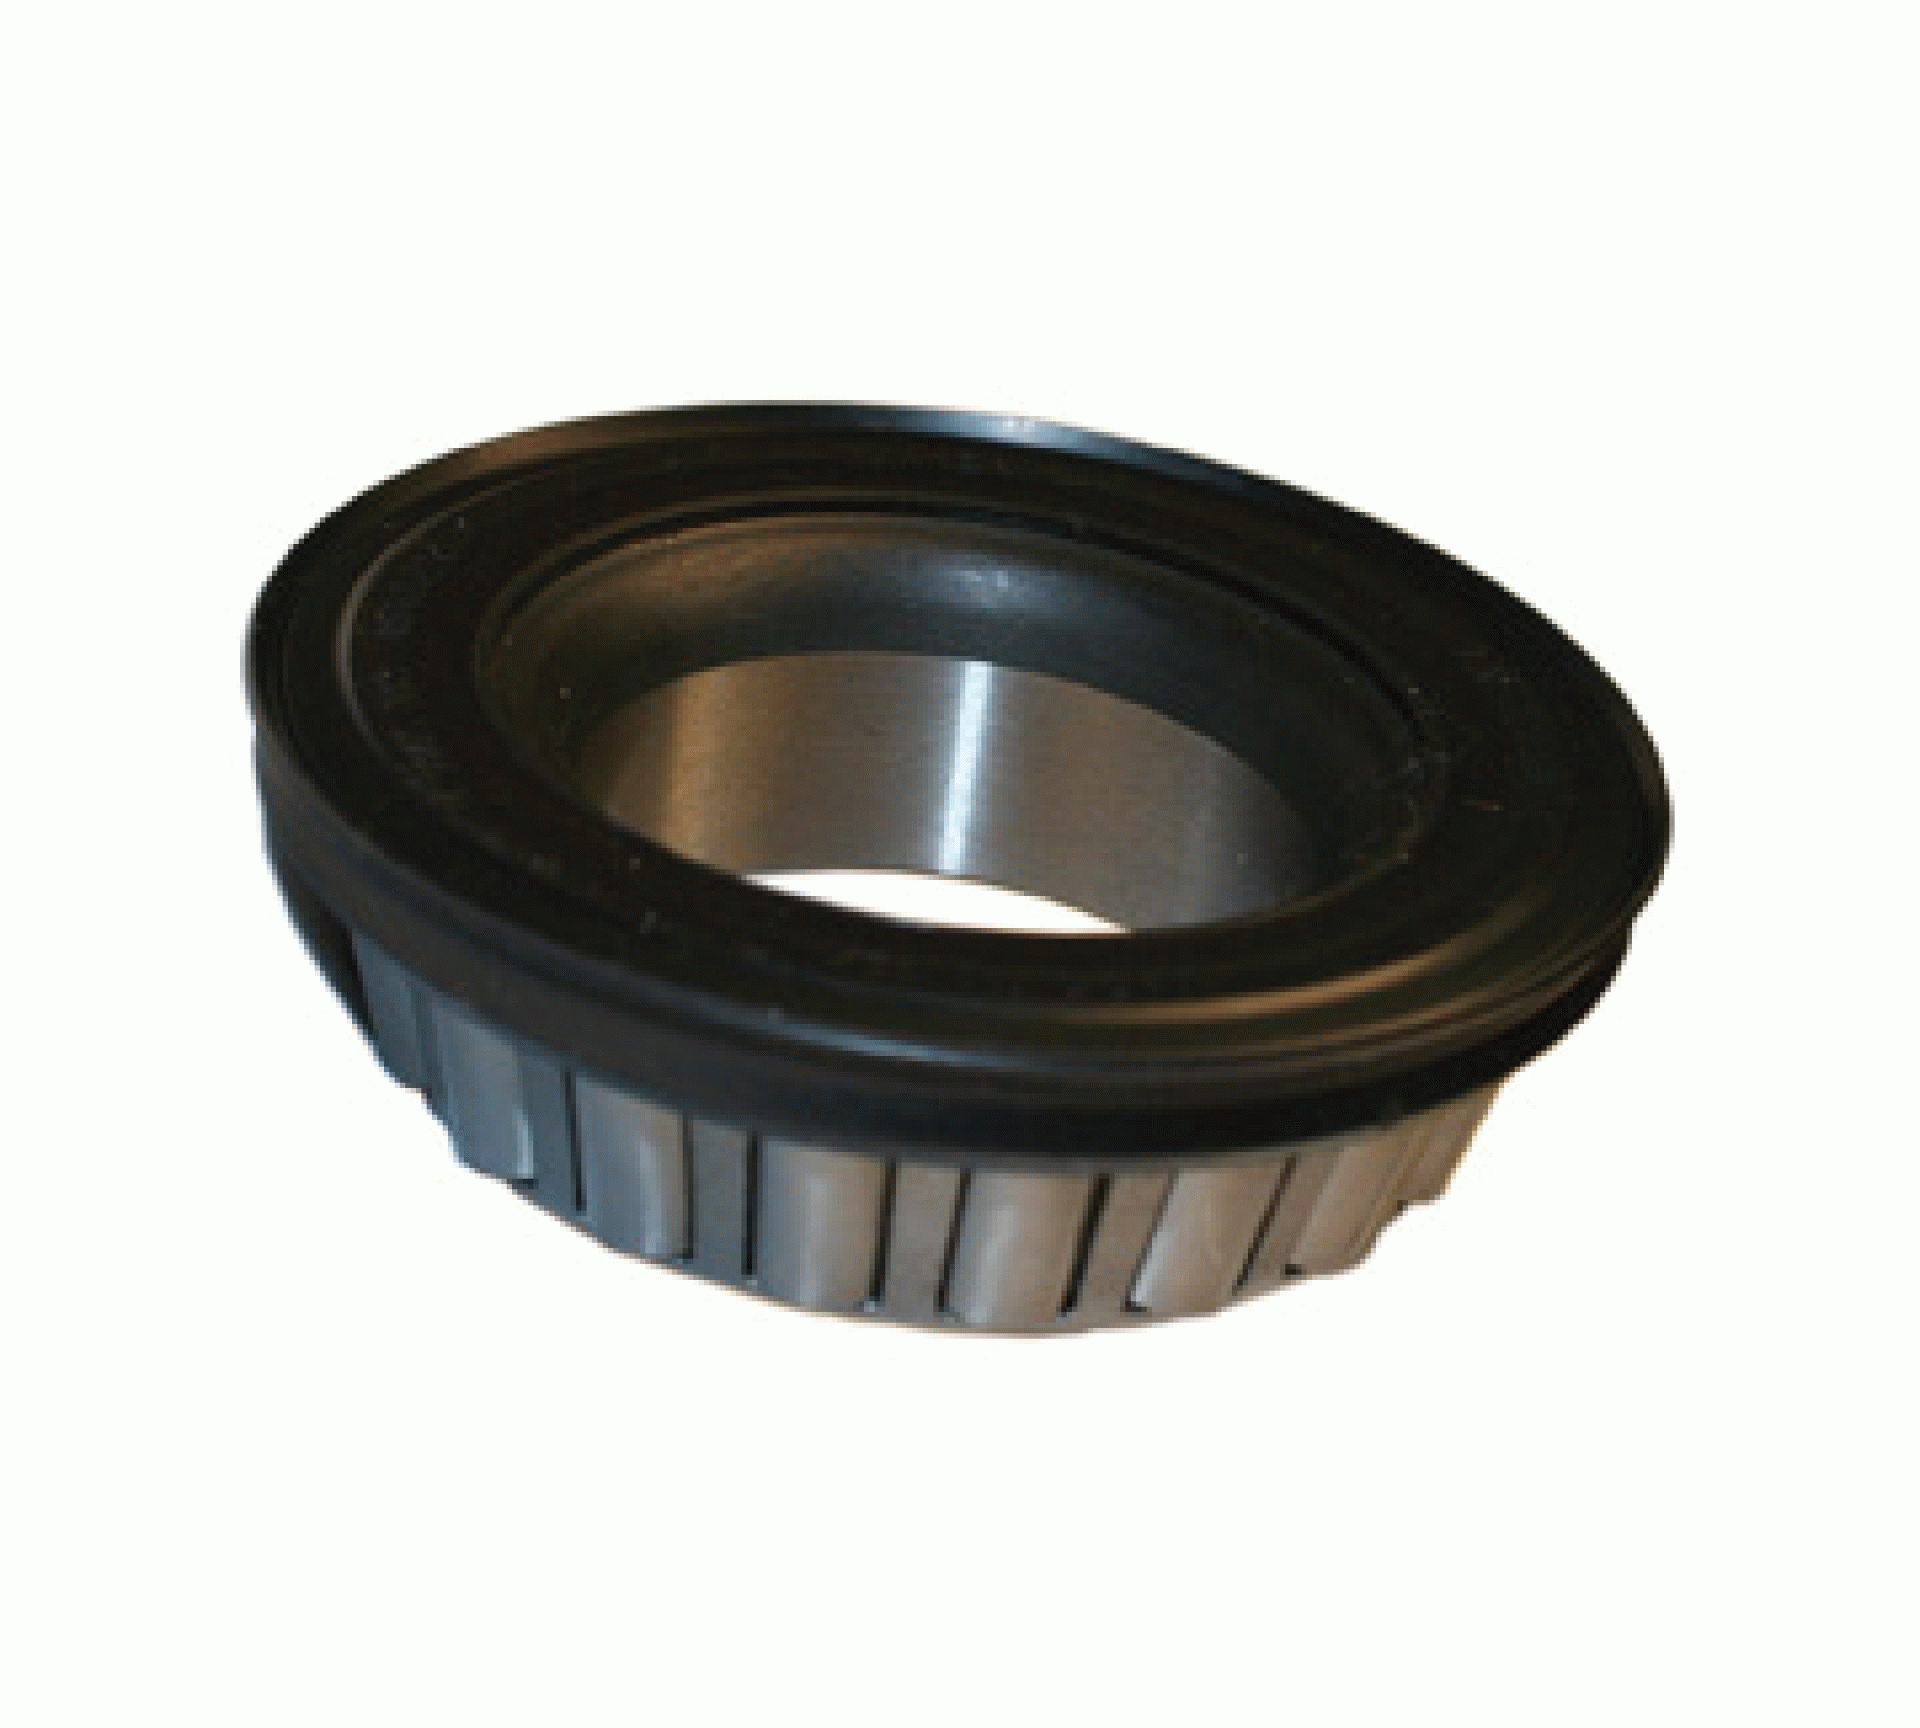 TIMKEN BEARINGS | LM67000LA-902A1 | BEARING - WITH SEAL 1.25" CONE # LM67000